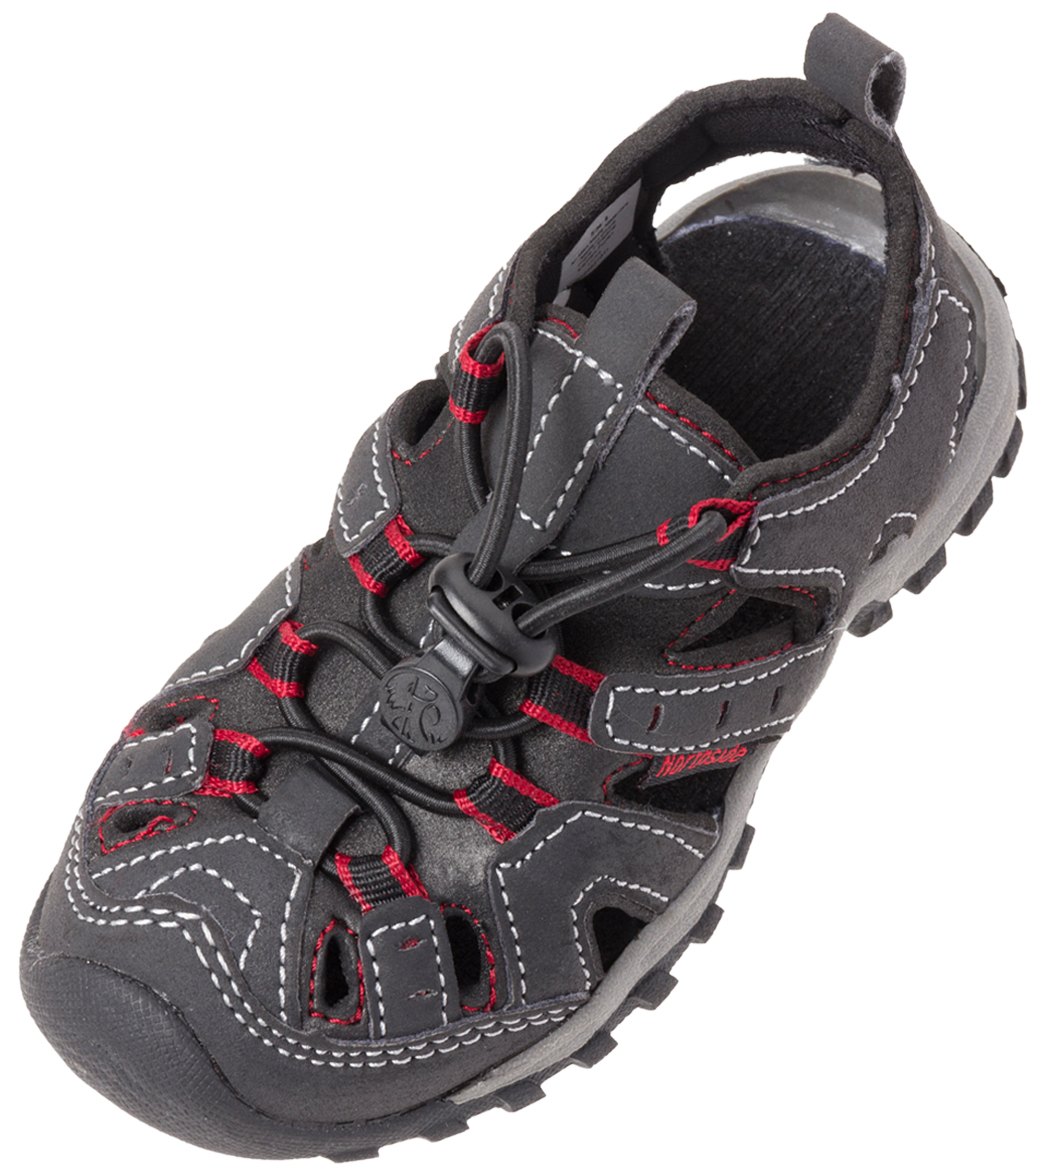 Northside Boys' Burke Ii Water Shoes - Black/Red 6 Faux-Suede - Swimoutlet.com